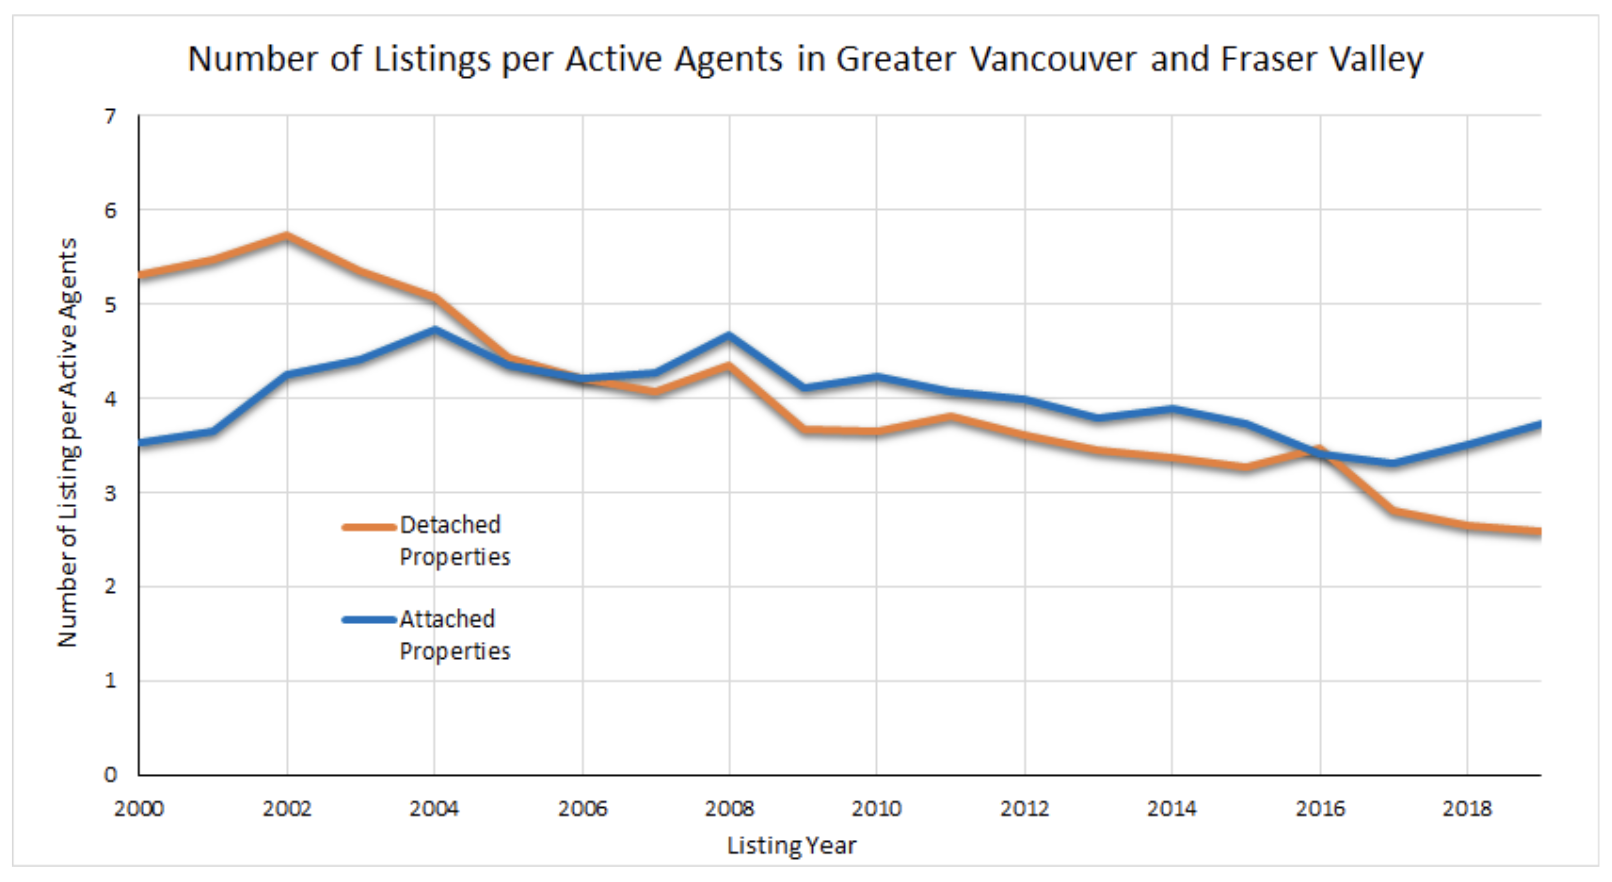 Number of listings per active agents in Greater Vancouver